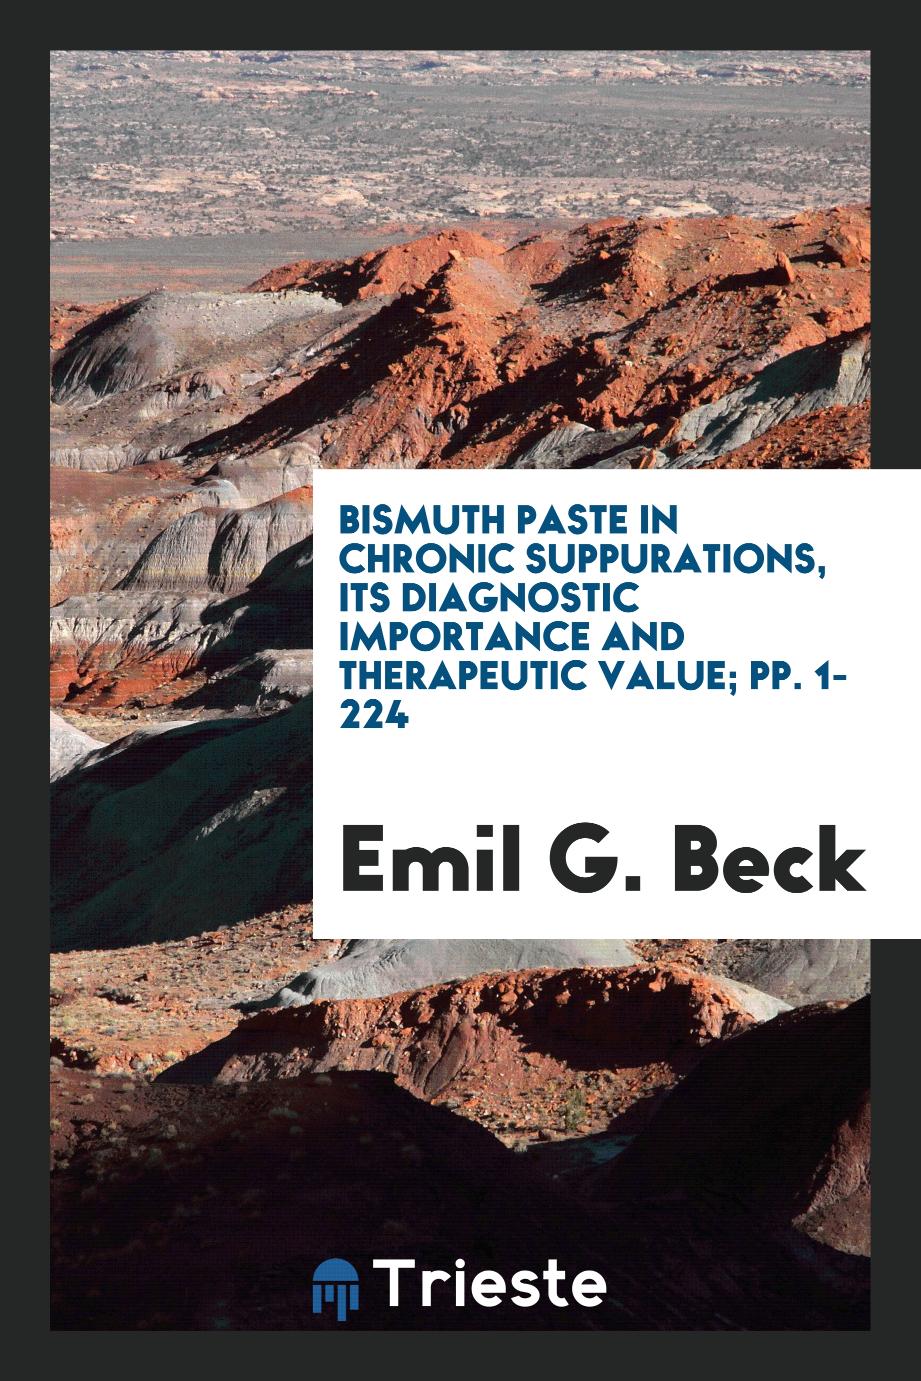 Bismuth Paste in Chronic Suppurations, Its Diagnostic Importance and Therapeutic Value; pp. 1-224